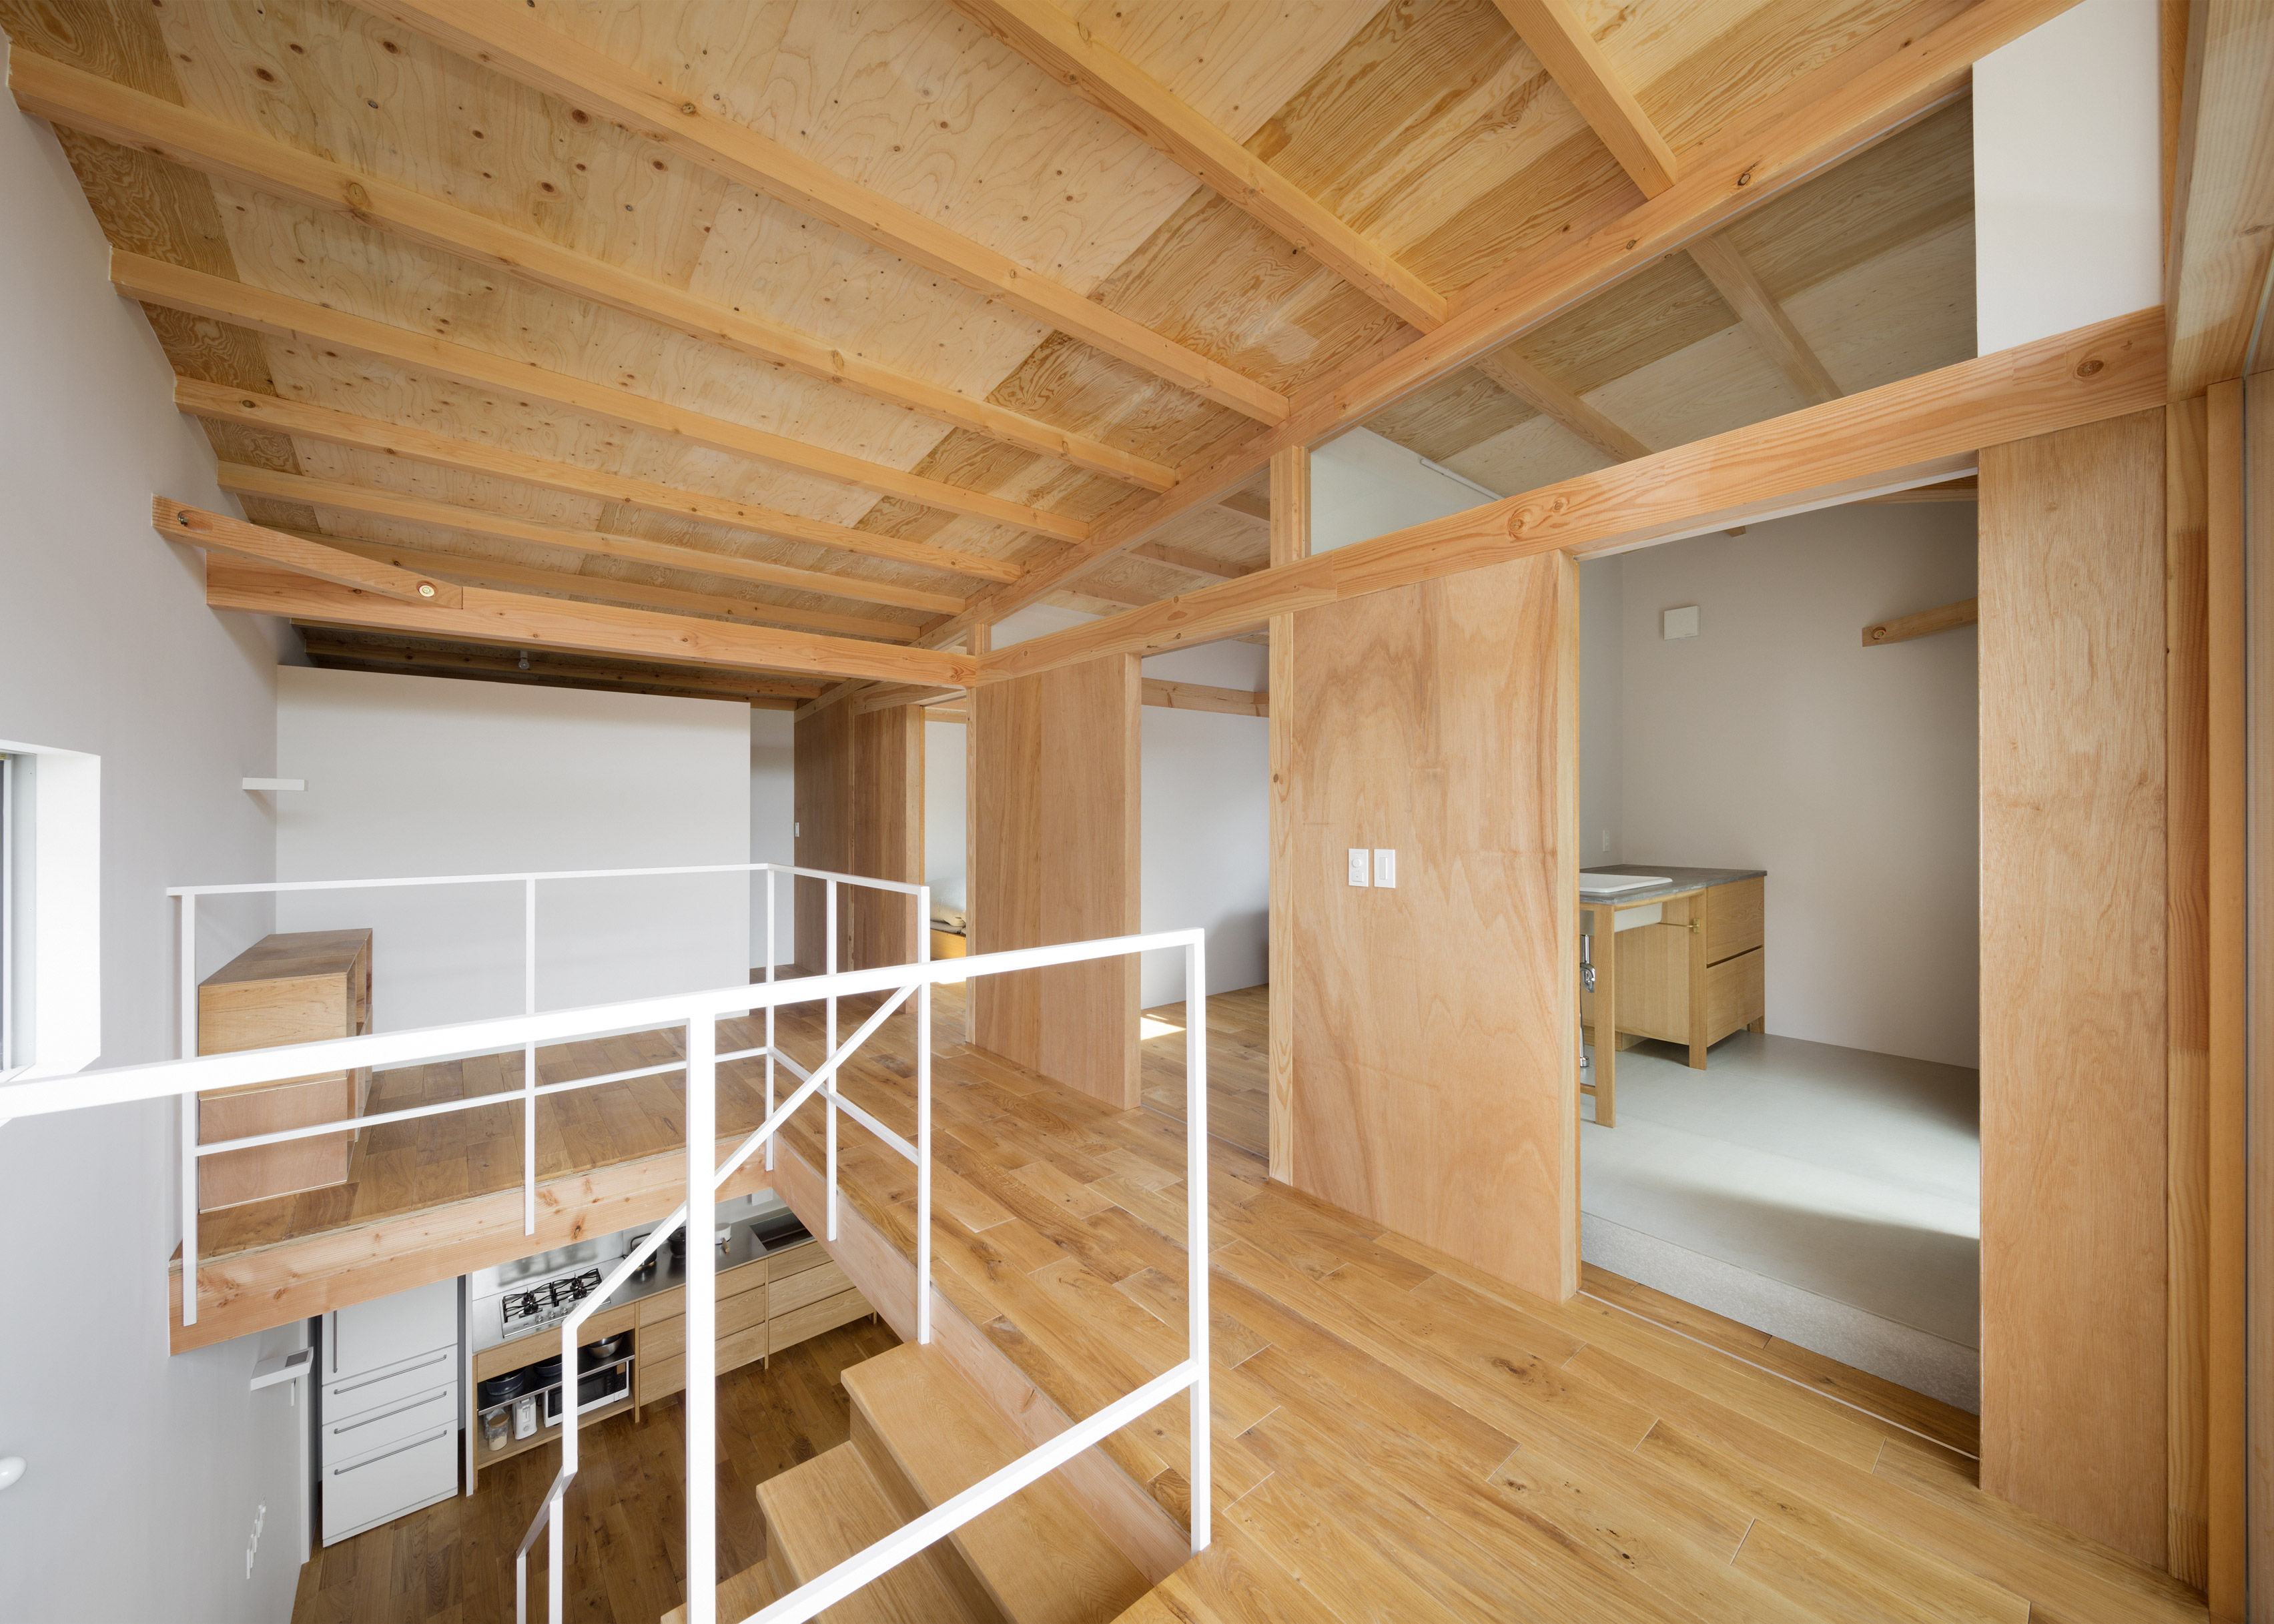 House In Mikage Contrasts White Surfaces With Exposed Wooden